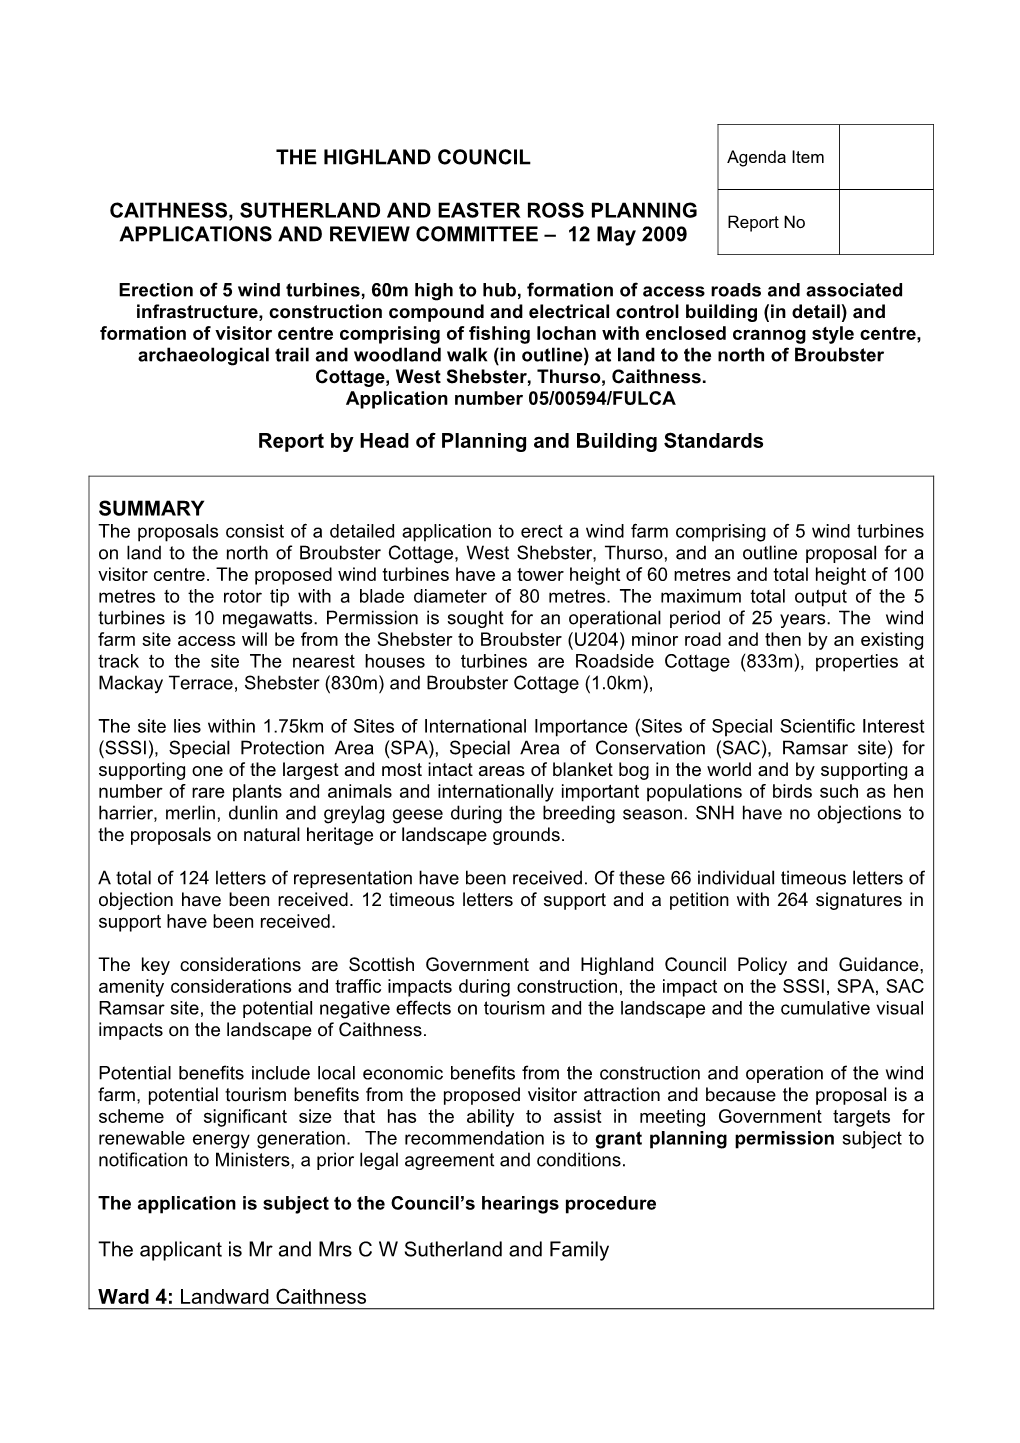 THE HIGHLAND COUNCIL CAITHNESS, SUTHERLAND and EASTER ROSS PLANNING APPLICATIONS and REVIEW COMMITTEE – 12 May 2009 Report By